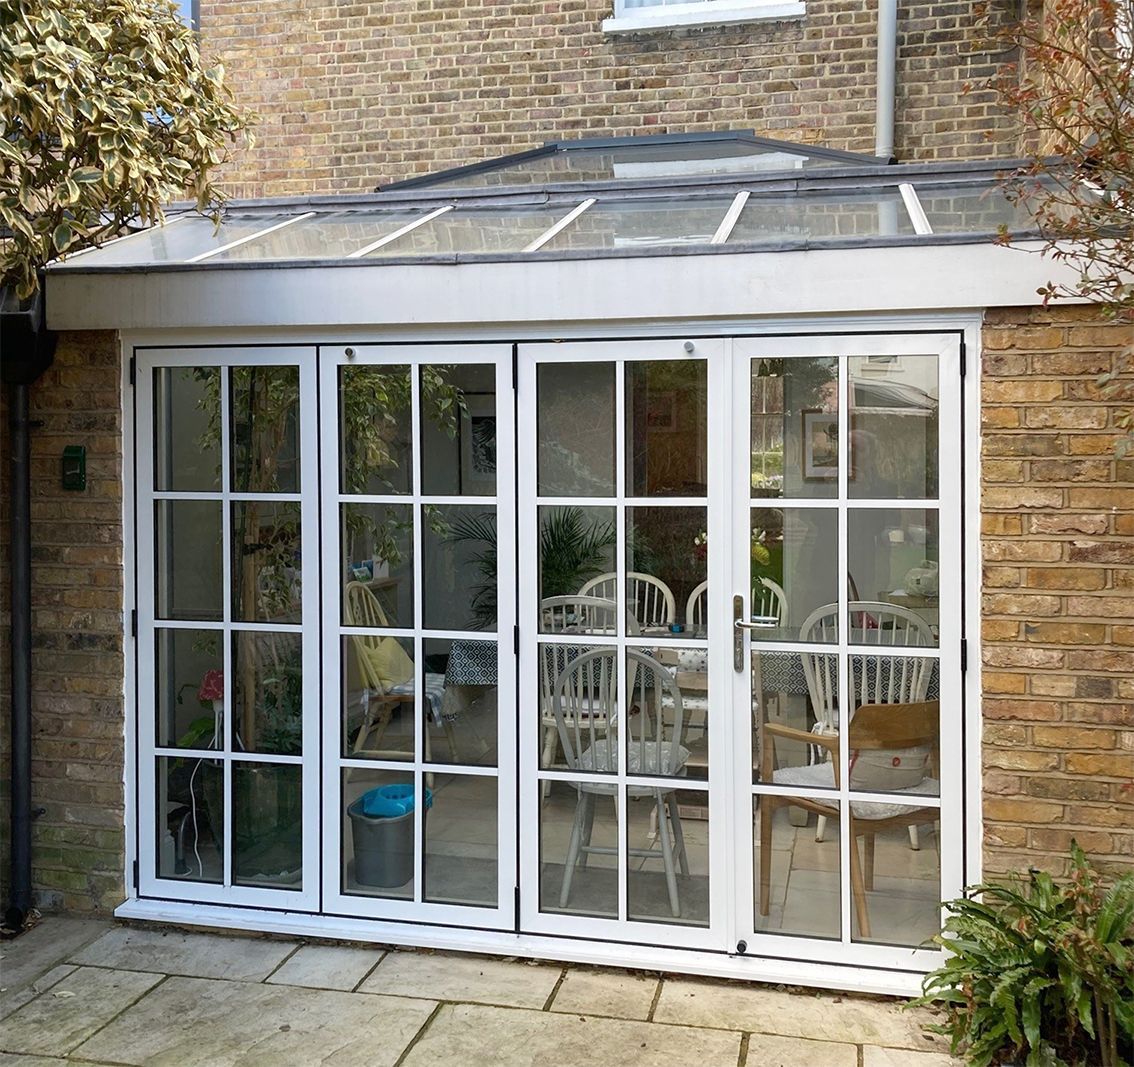 Timber French Doors converted to Modern Authentic Bi-folding Doors in London Property